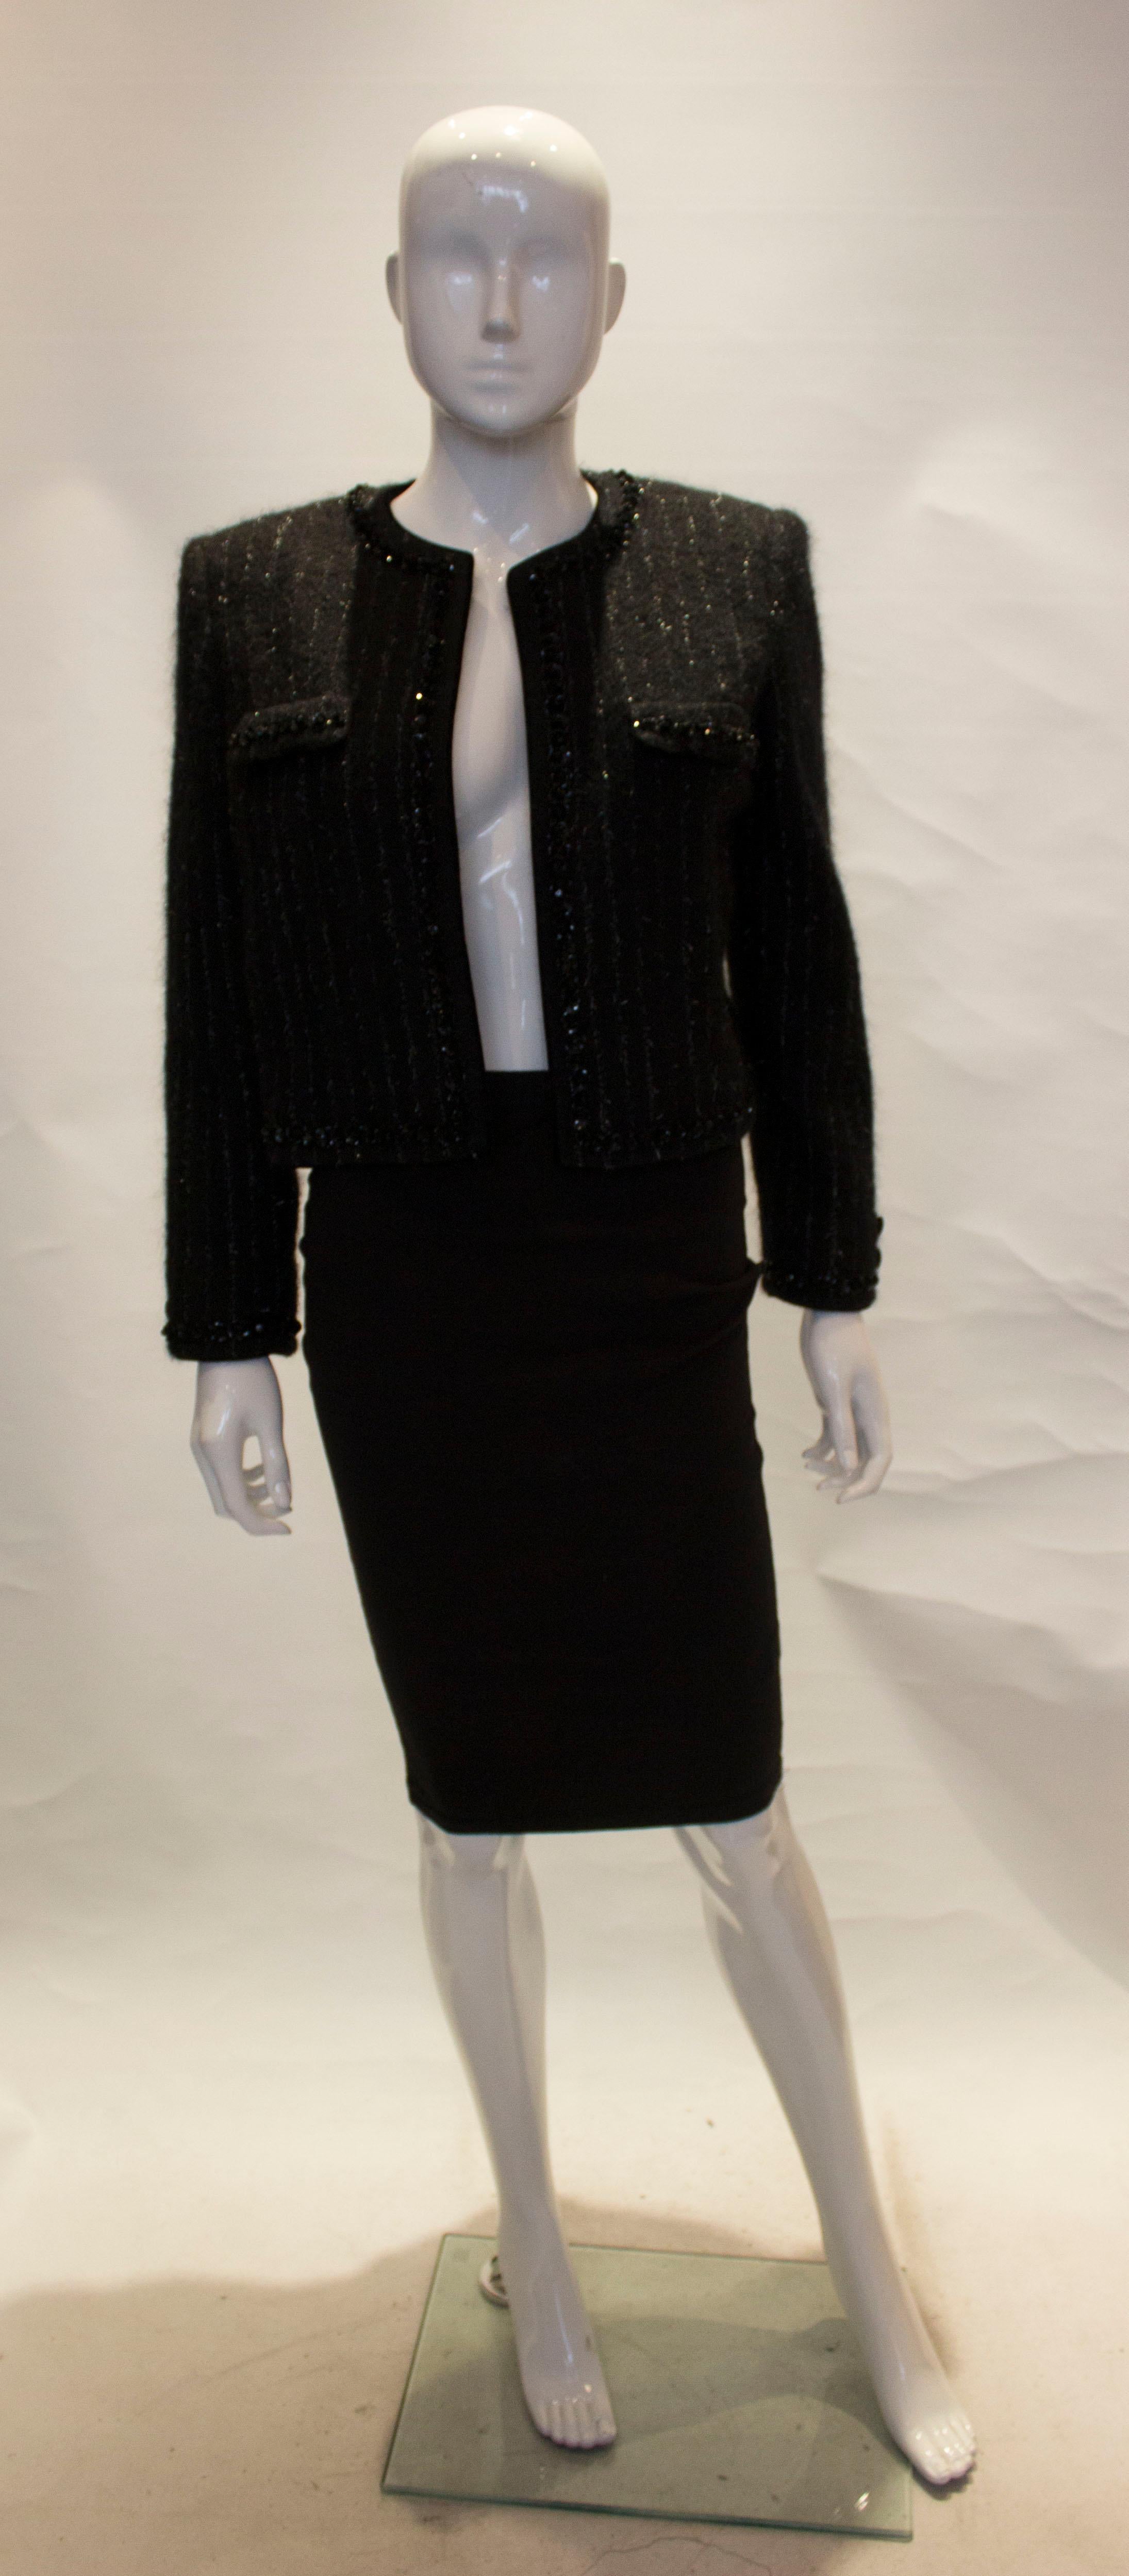 A beautiful vintage jacket by Giorgio Grati. n a black wool mix with a silver vertical stripe, the jacket is collarless and two faux flap pockets. It has a bead detail along the edge and pockets.